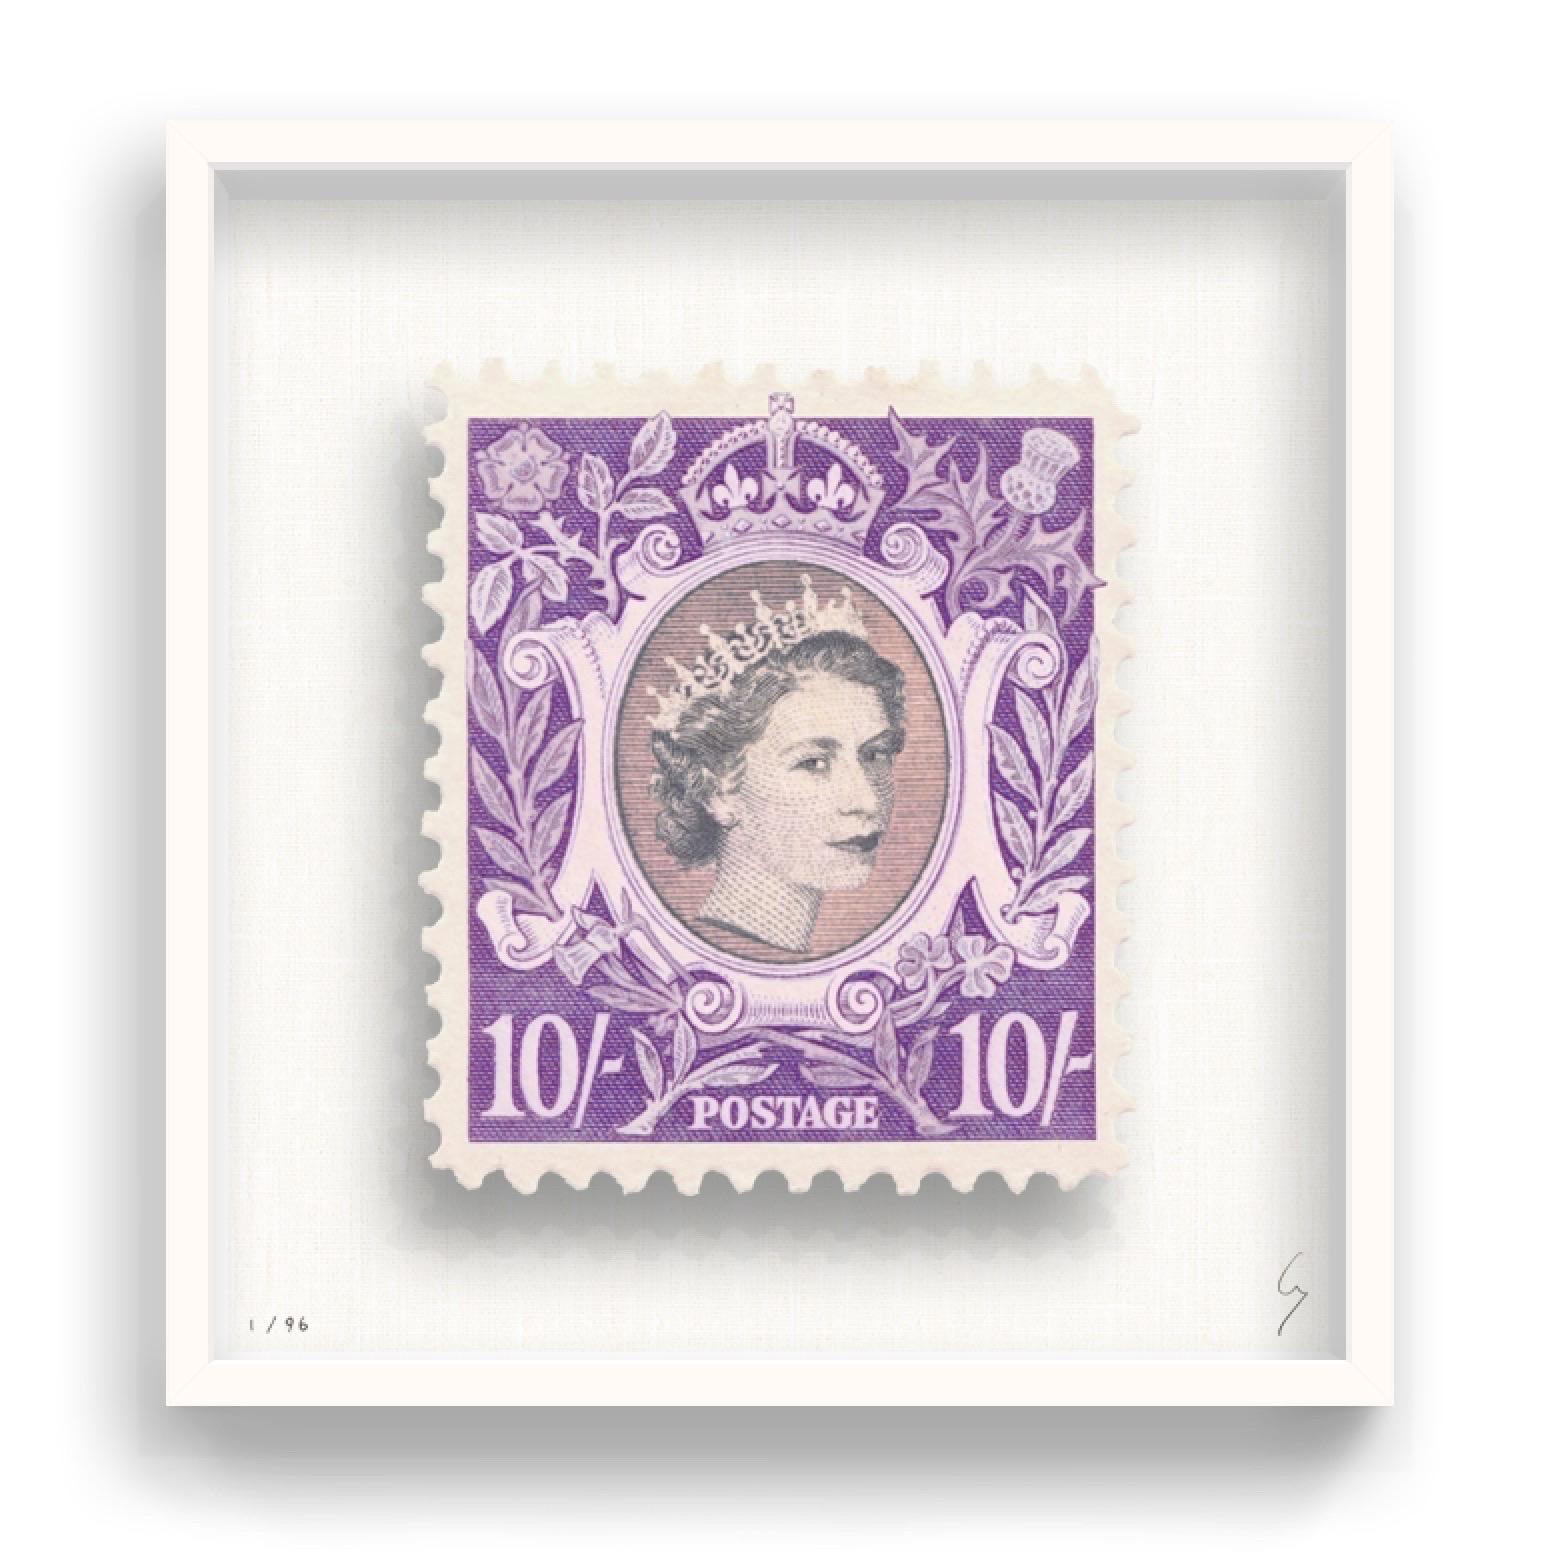 Guy Gee, Queen P (medium)

Hand-engraved print on 350gsm on G.F Smith card
53 x 56 cm (20 4/5 x 22 2/5)
Frame included 
Edition of 96

Each artwork by Guy had been digitally reimagined from an original postage stamp. Cut out and finished by hand,